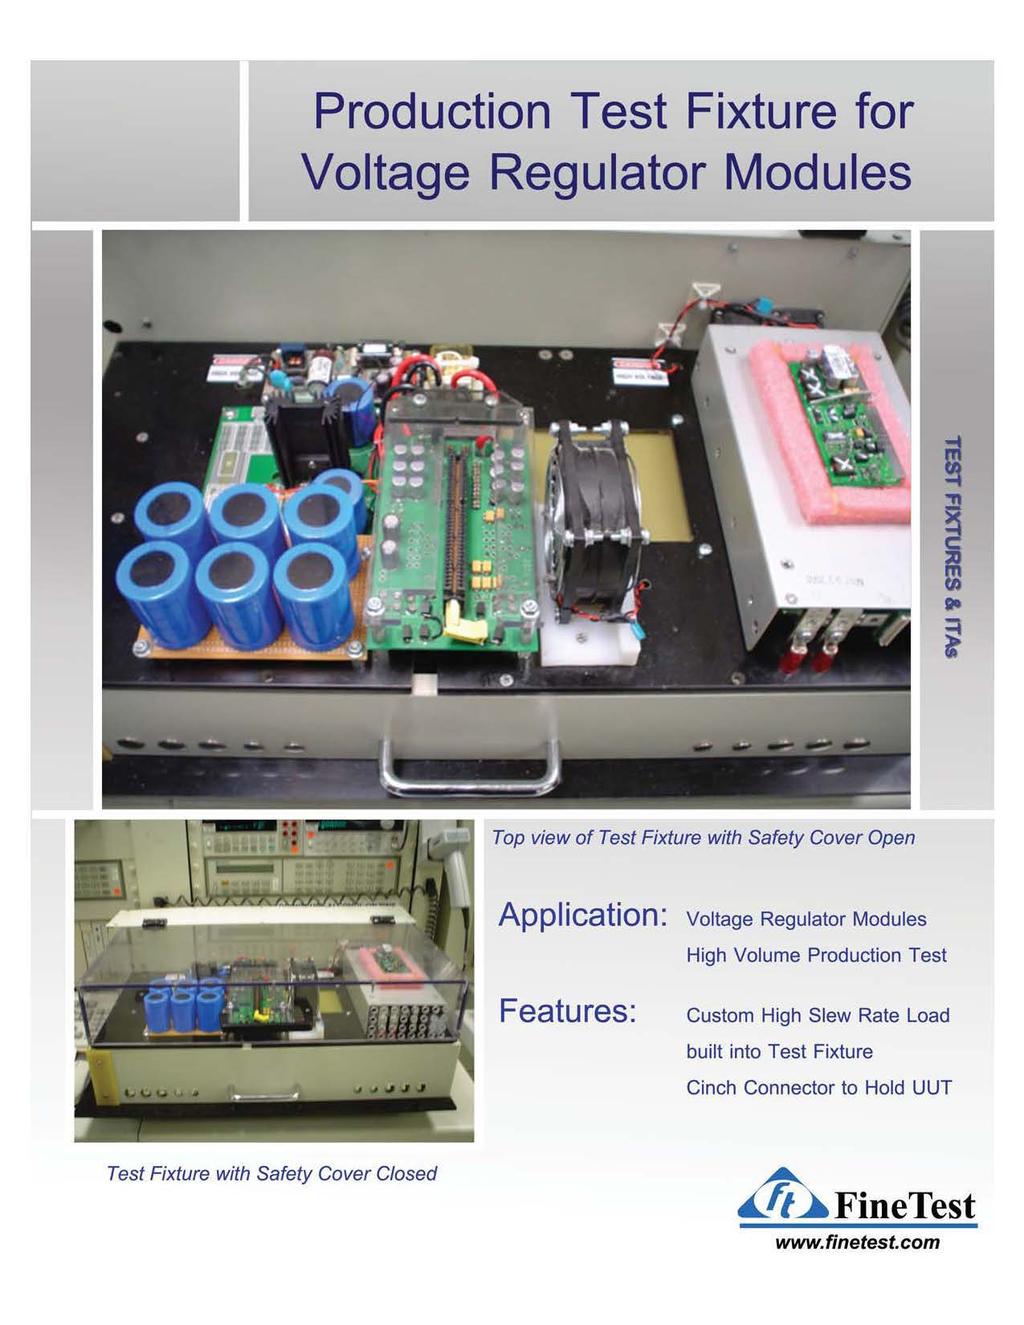 Production Test Fixture for Voltage Regulator Modules Top view of Test Fixture with Safety Cover Open Application: Voltage Regulator Modules High Volume